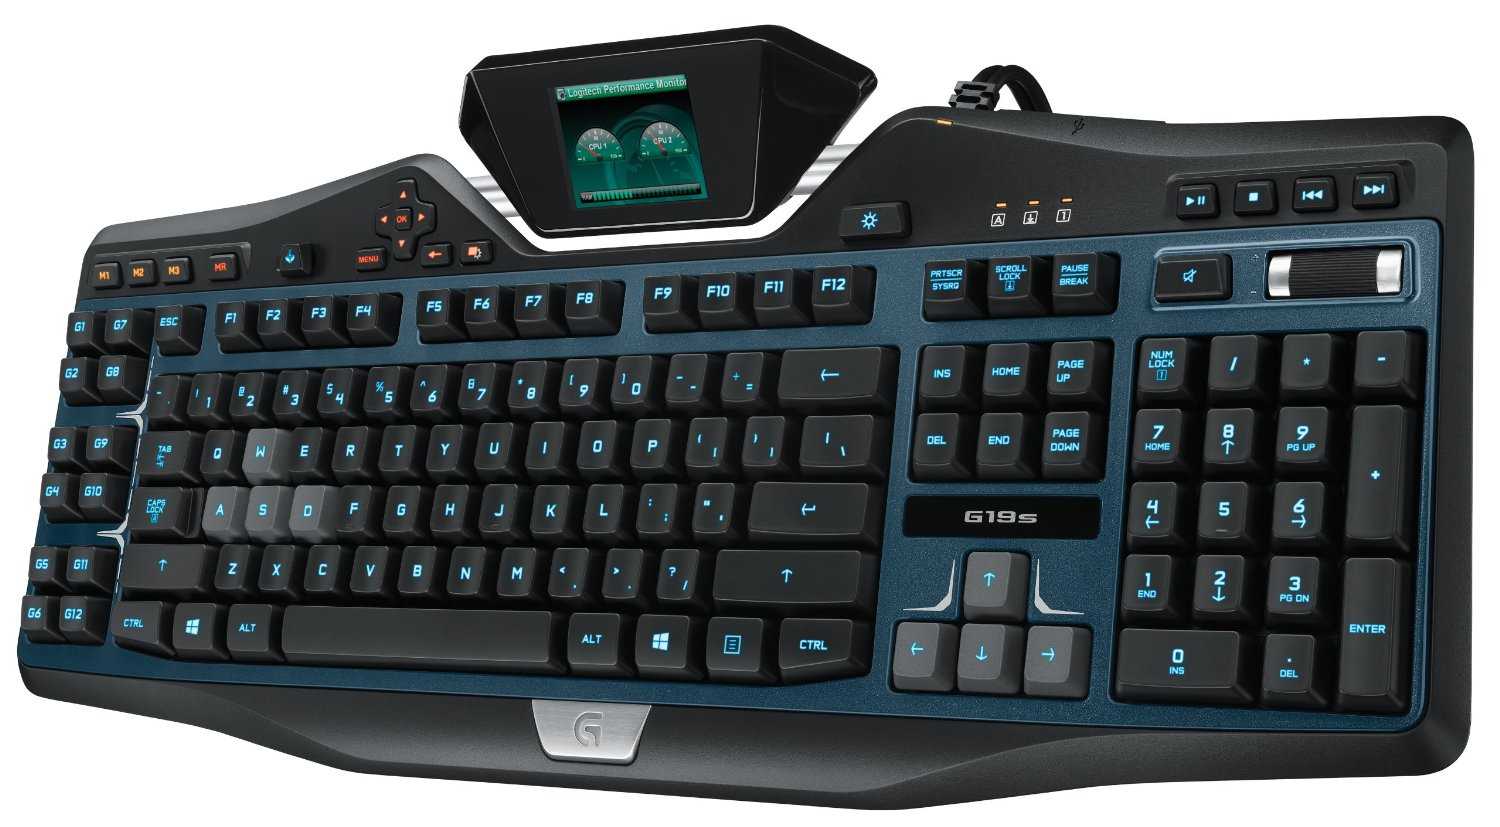 Logitech G19s Gaming Keyboard with Color Game Panel Screen - Games